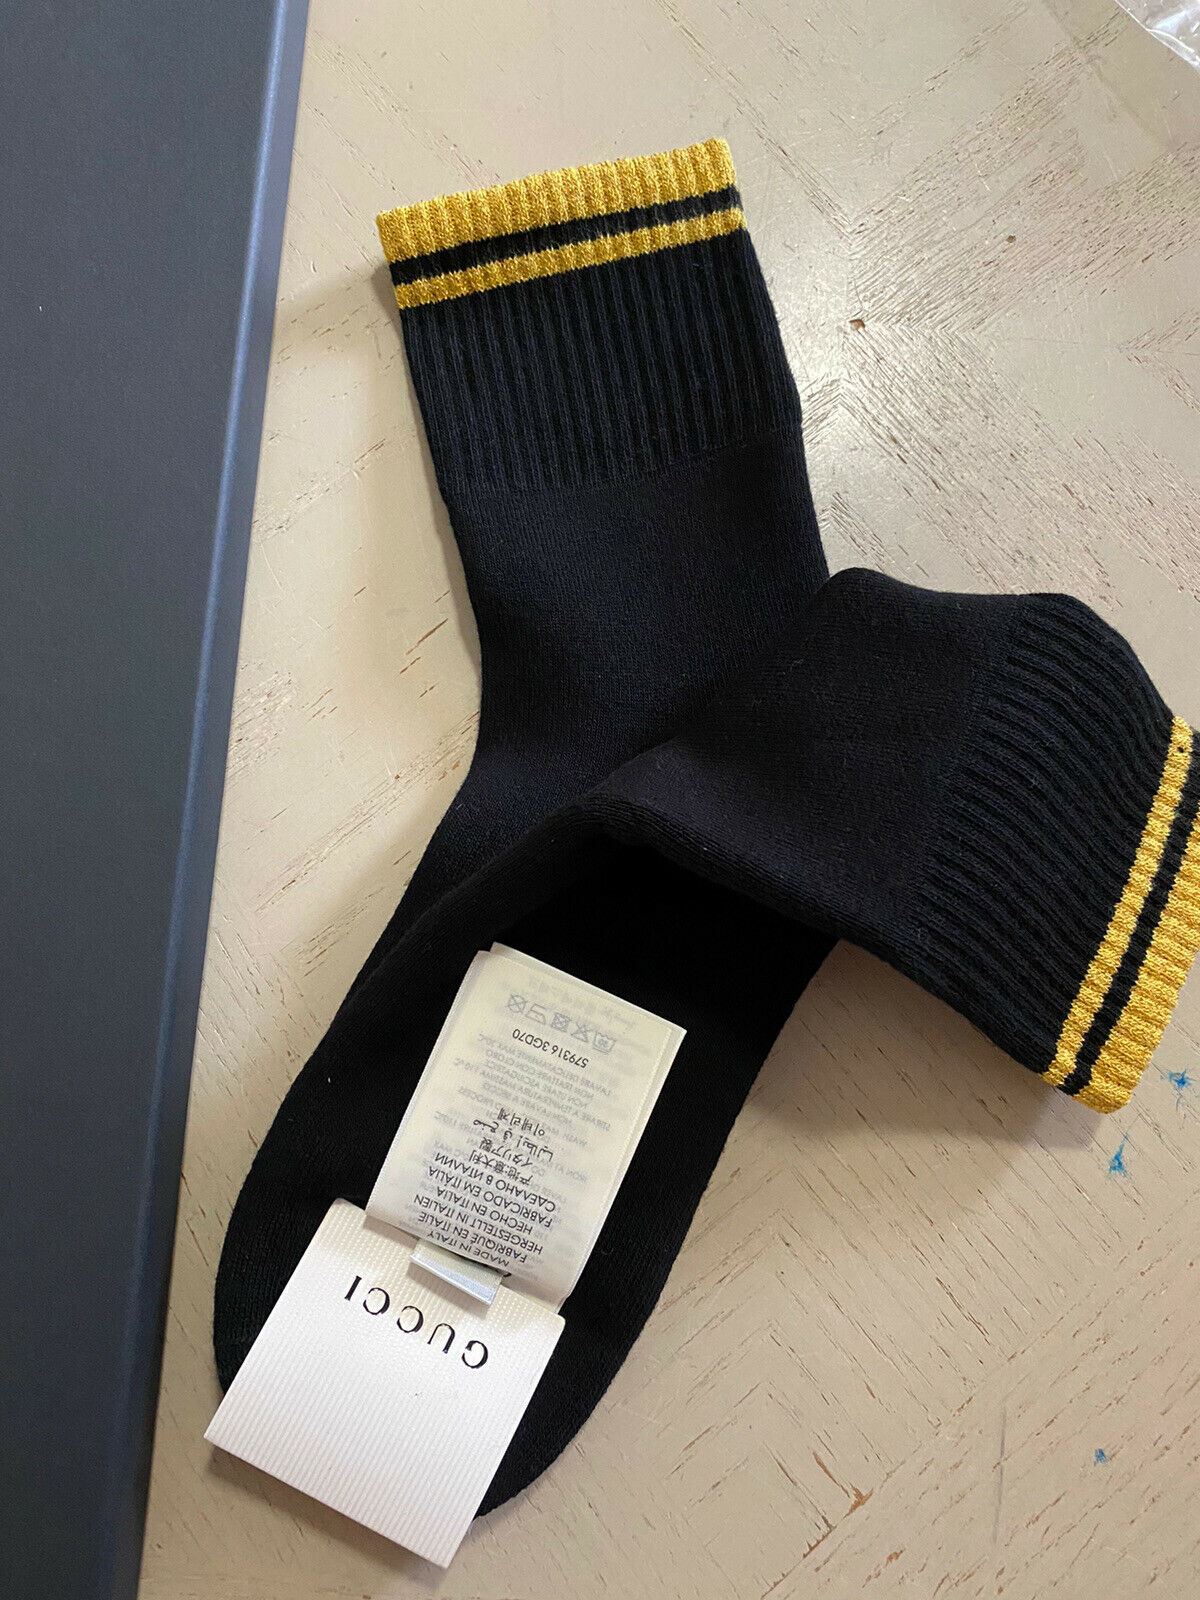 NWT Gucci  Cotton Socks With Gucci Monogram Black Size M Italy